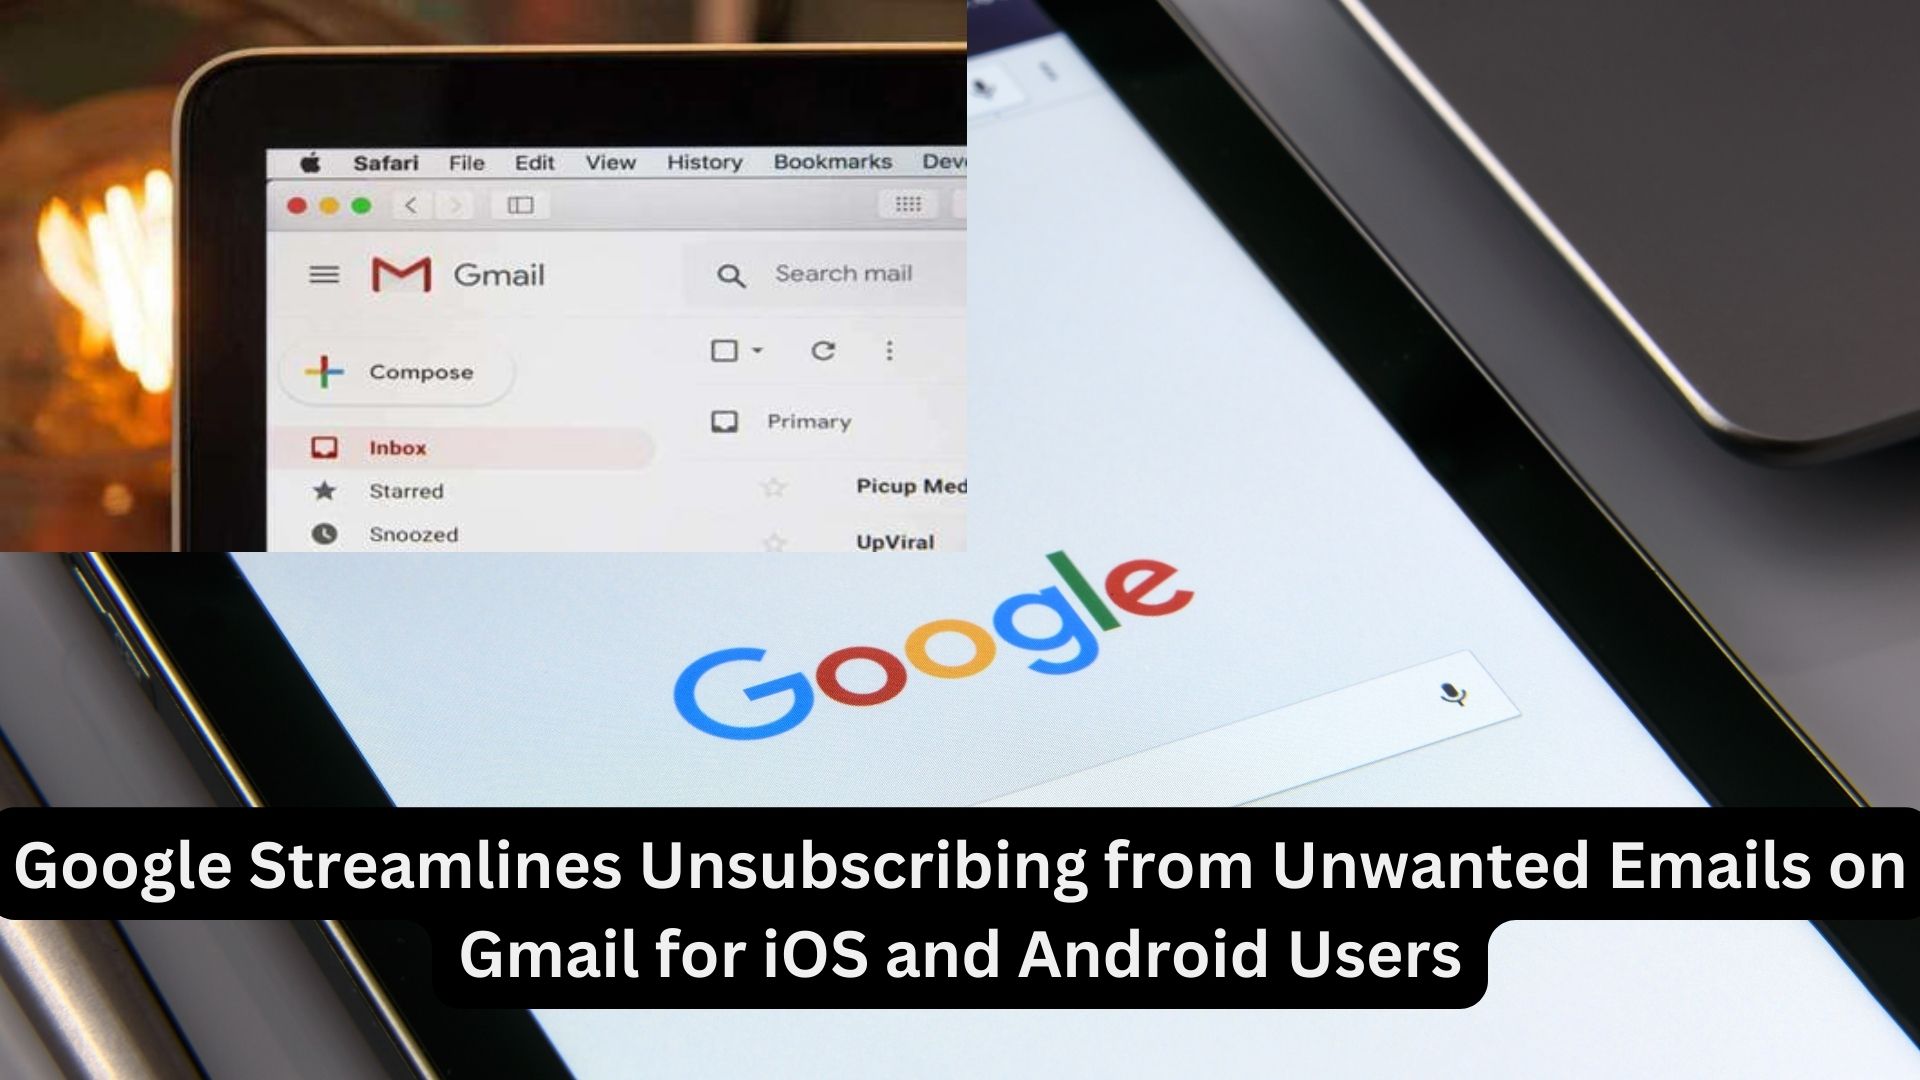 Google Streamlines Unsubscribing from Unwanted Emails on Gmail for iOS and Android Users